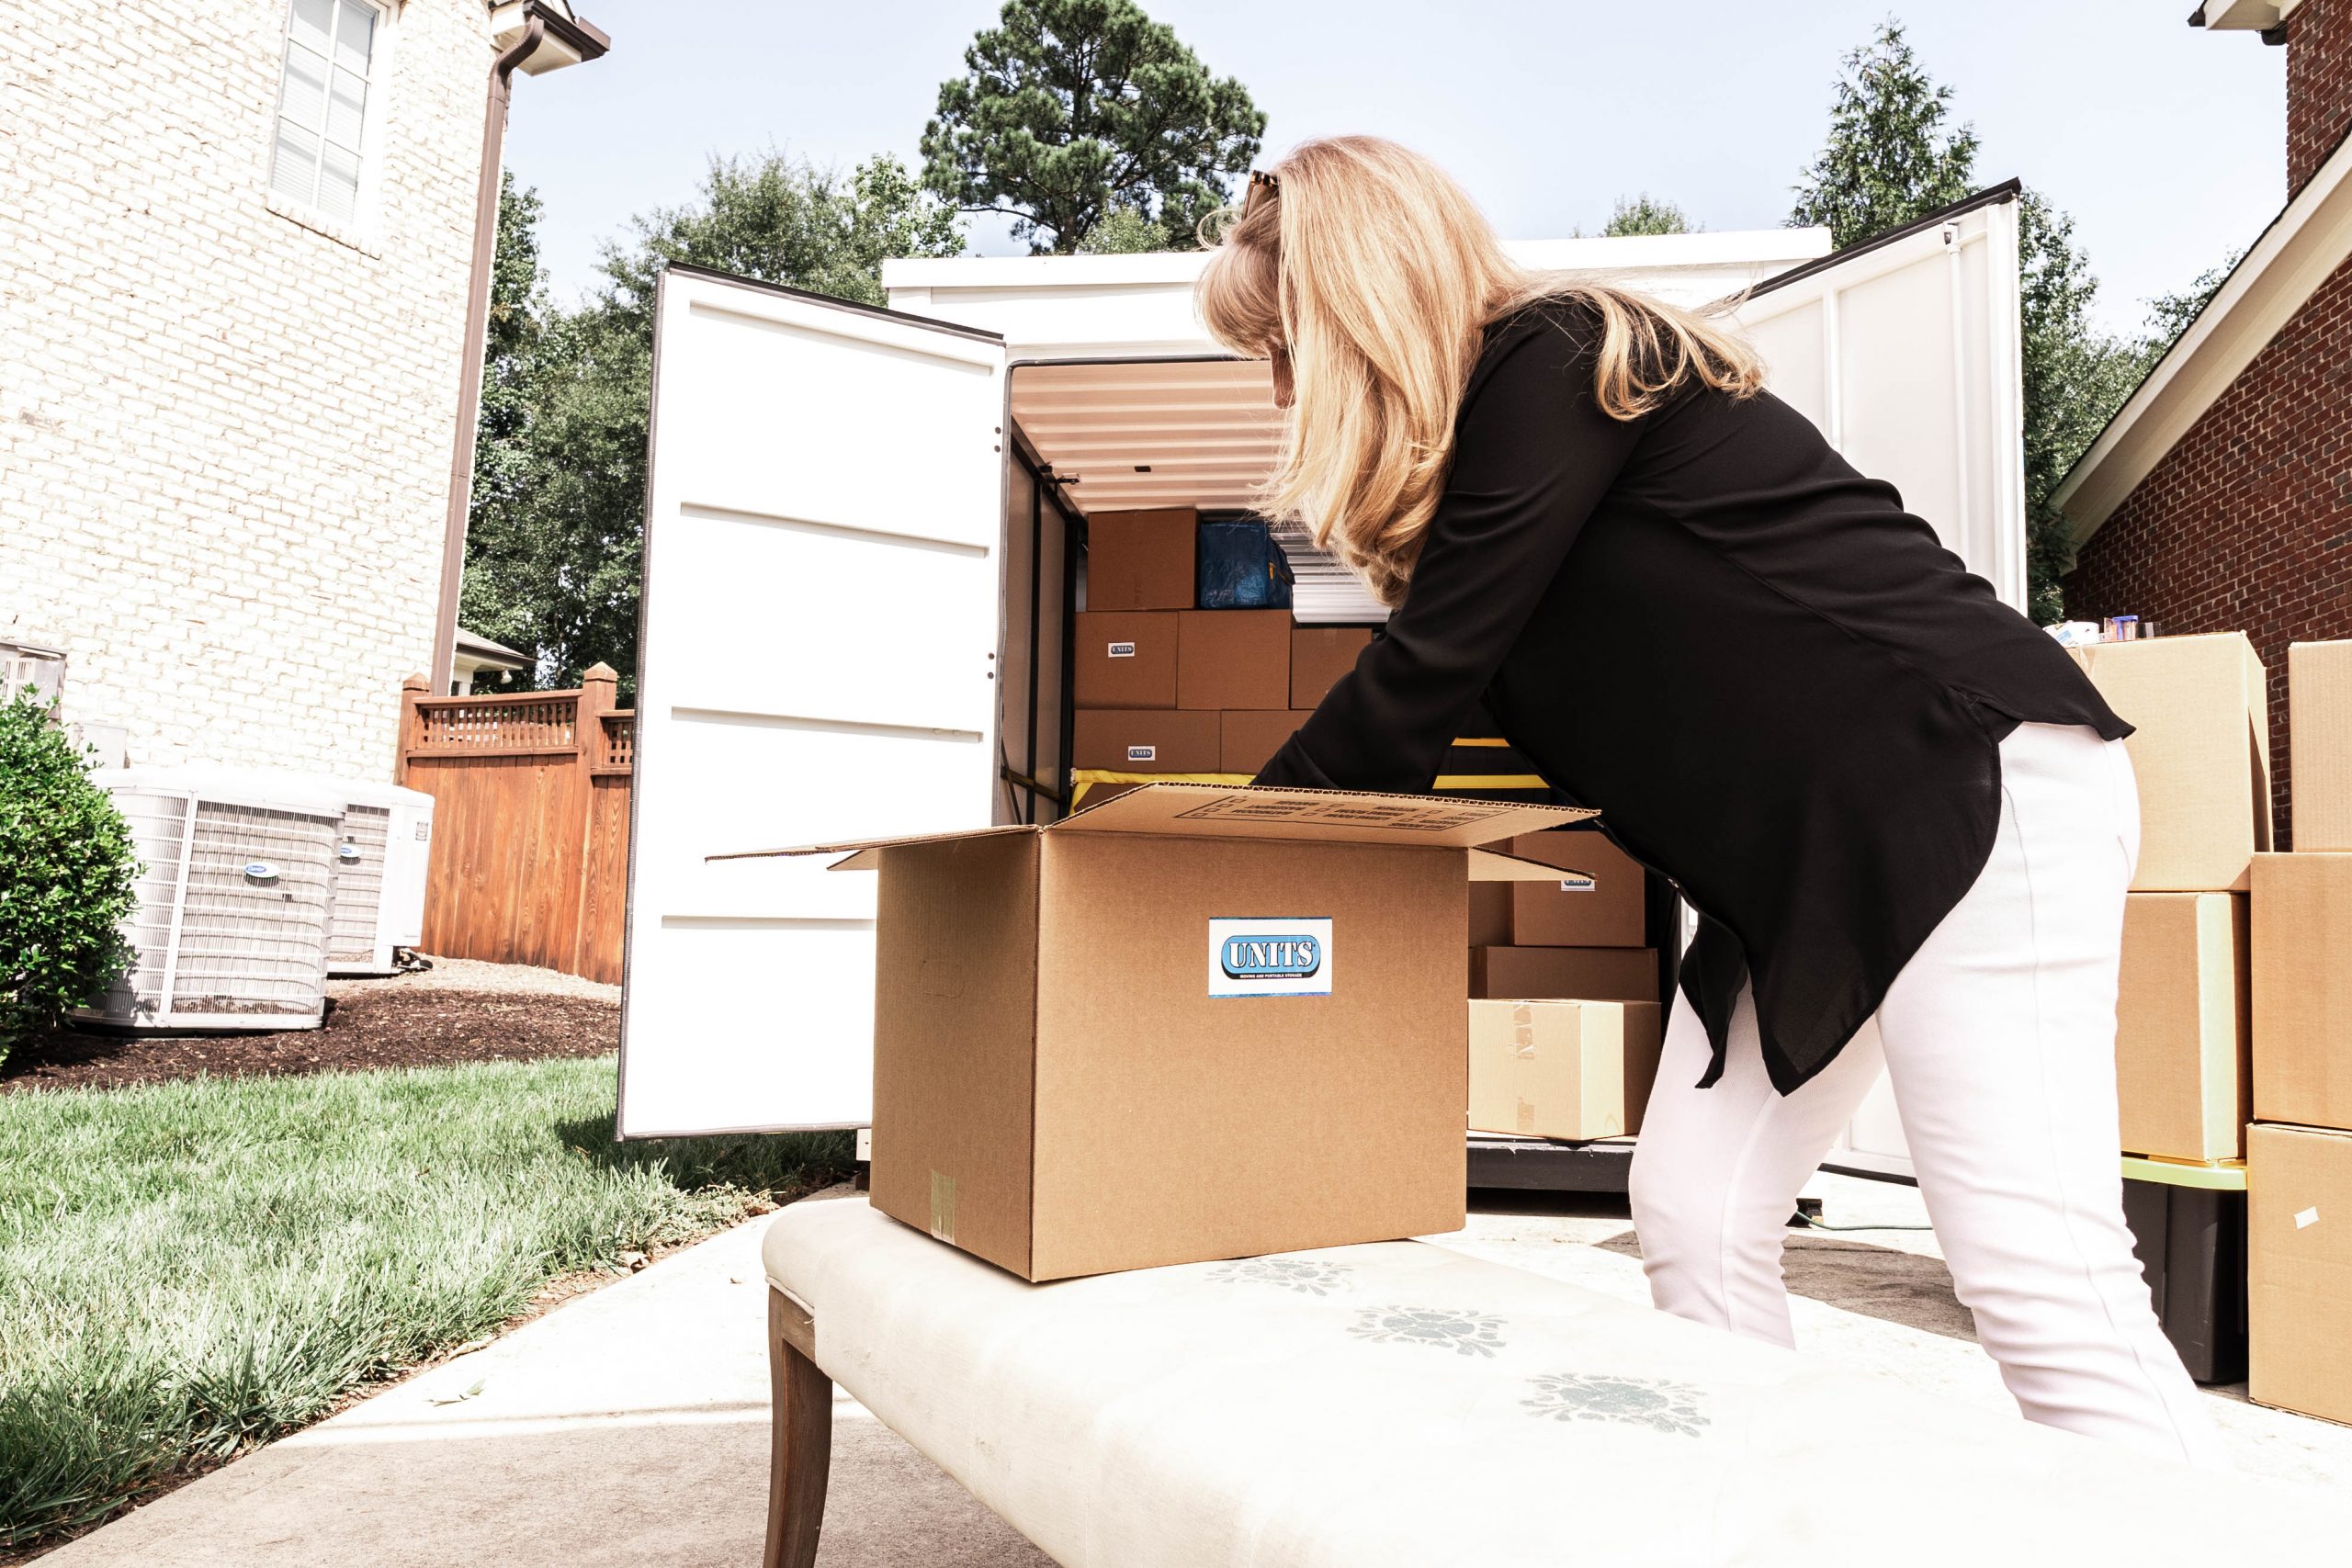 A woman packing a box with the units logo on it into a container.